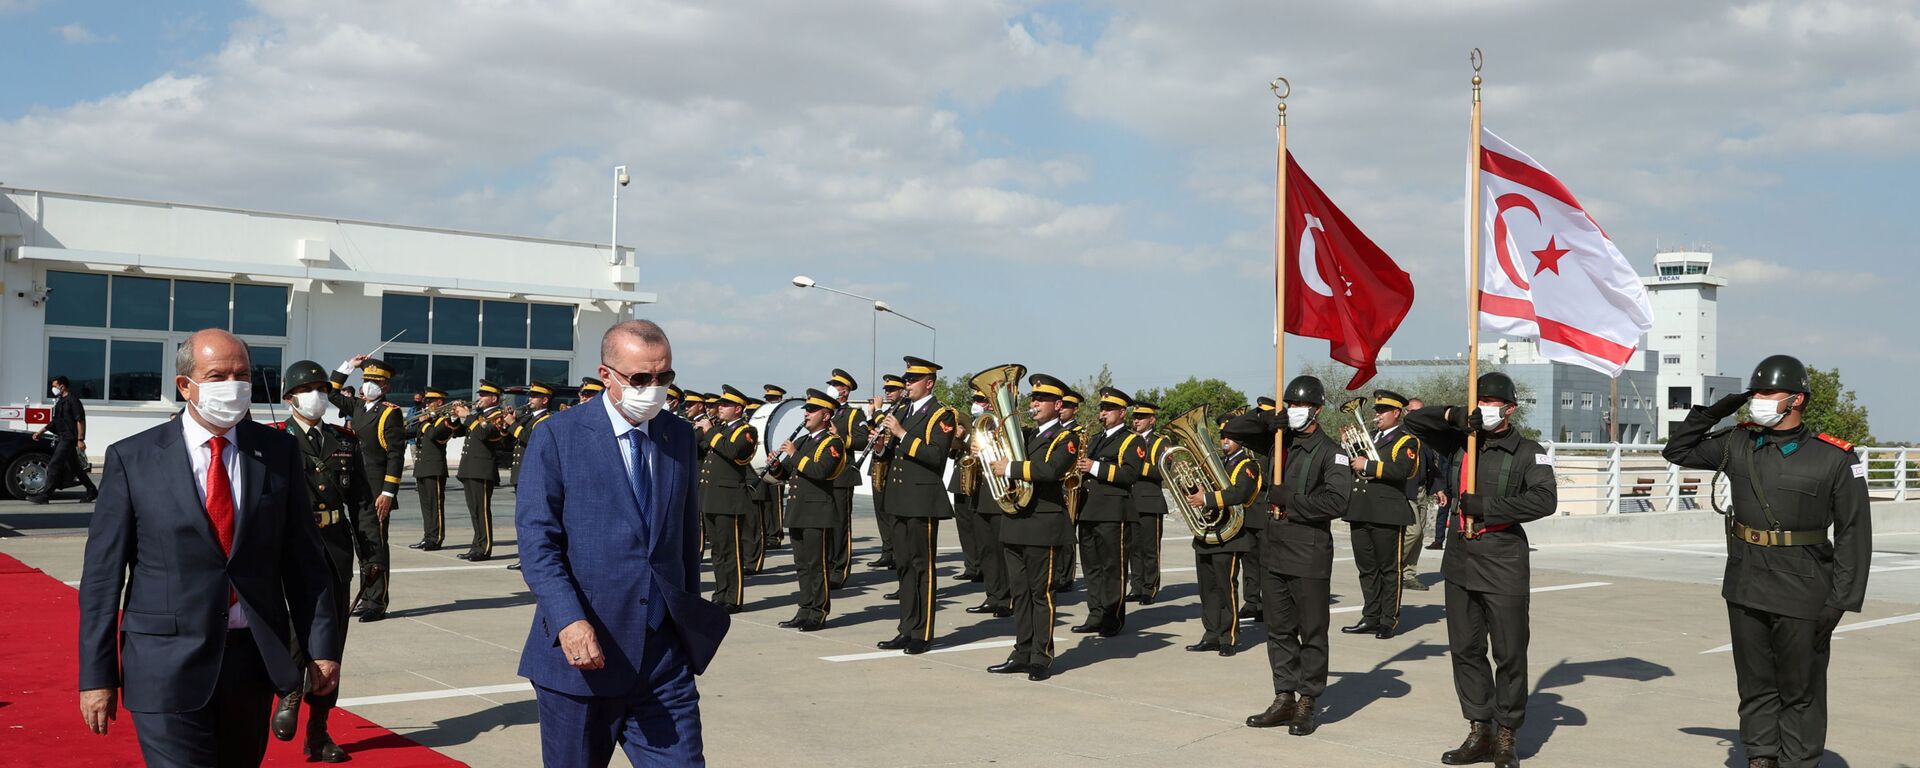 Turkish President Tayyip Erdogan reviews a guard of honour with Turkish Cypriot leader Ersin Tatar before he daparts from the Turkish Republic of Northern Cyprus, a breakway state recognized only by Turkey, in northern Nicosia, Cyprus July 20, 2021. - Sputnik International, 1920, 21.07.2021